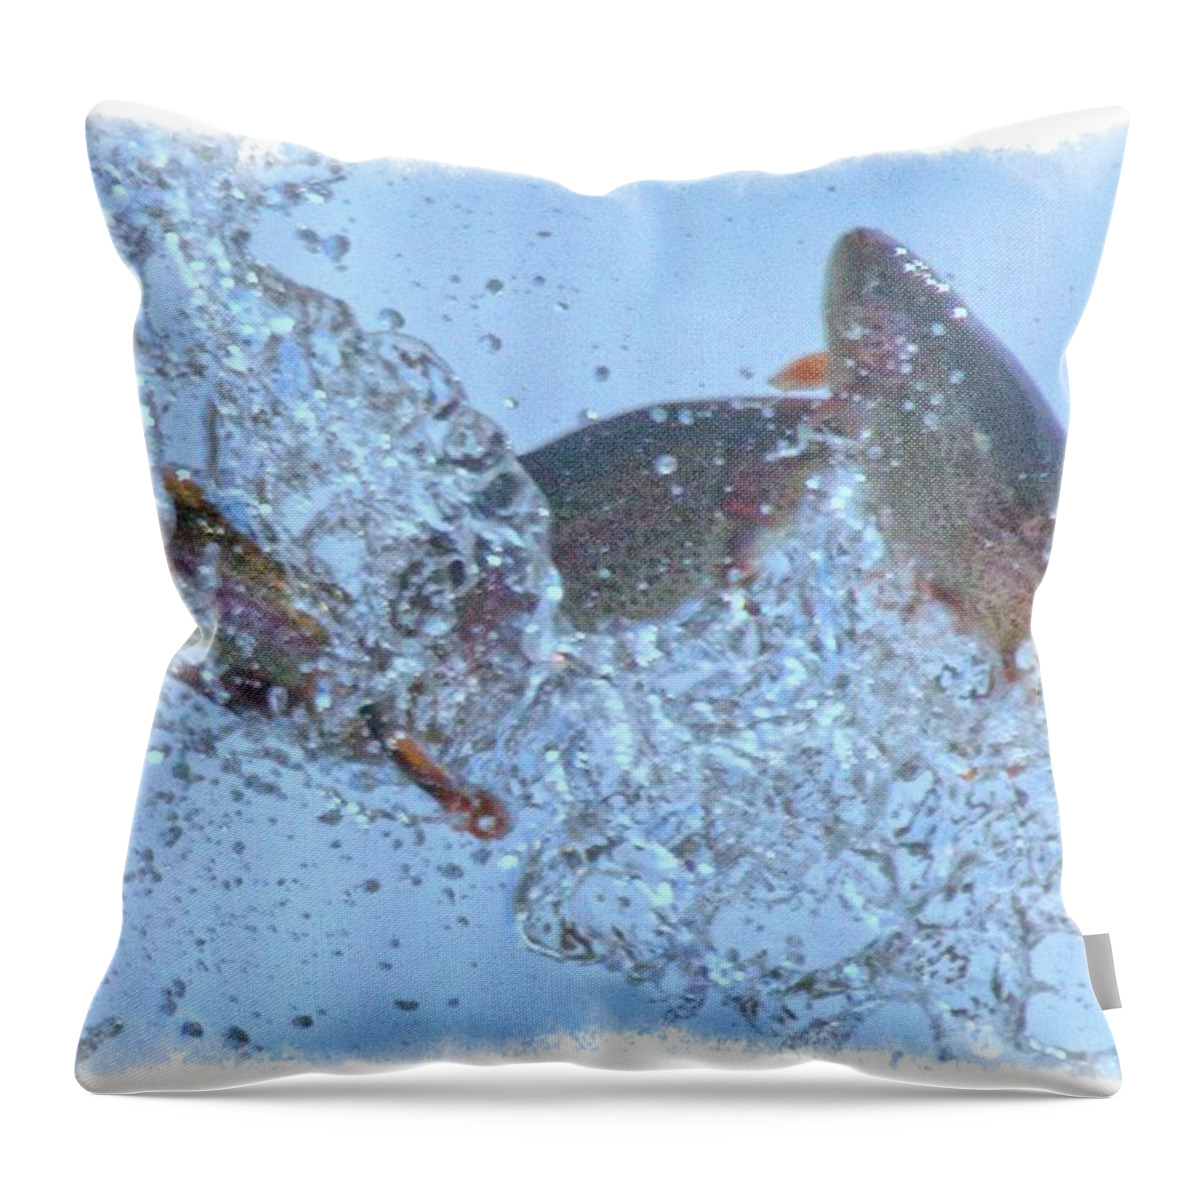 Mouth Throw Pillow featuring the photograph Splashing Trout by Constantine Gregory